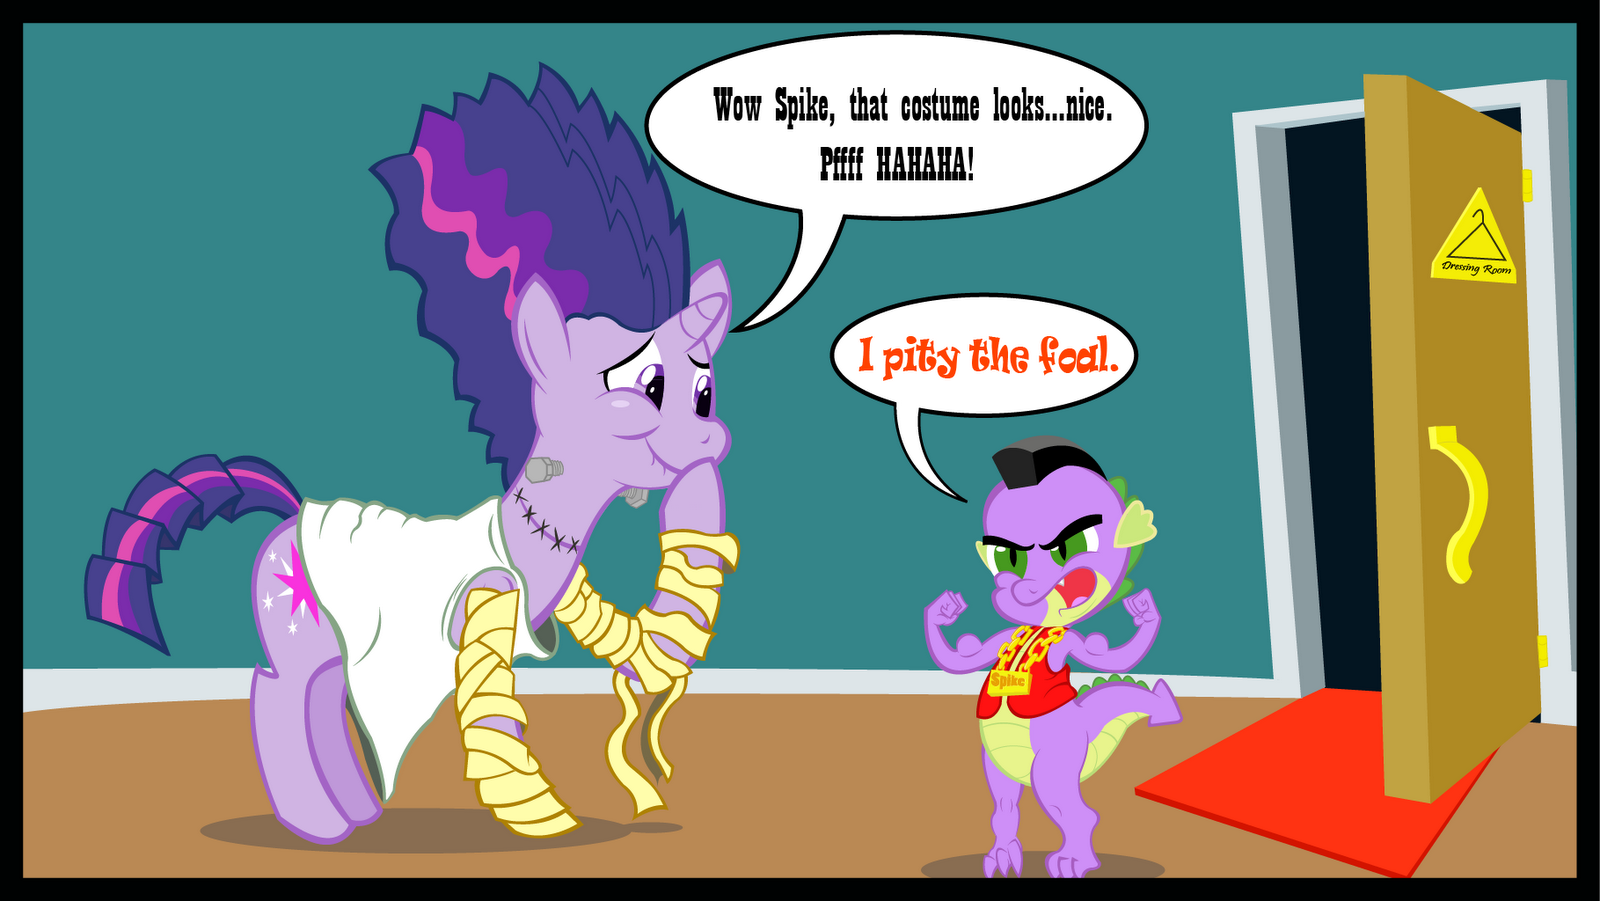 twilight_and_spike_costumes_by_geekscomeoutatnight-d4dcnot.png